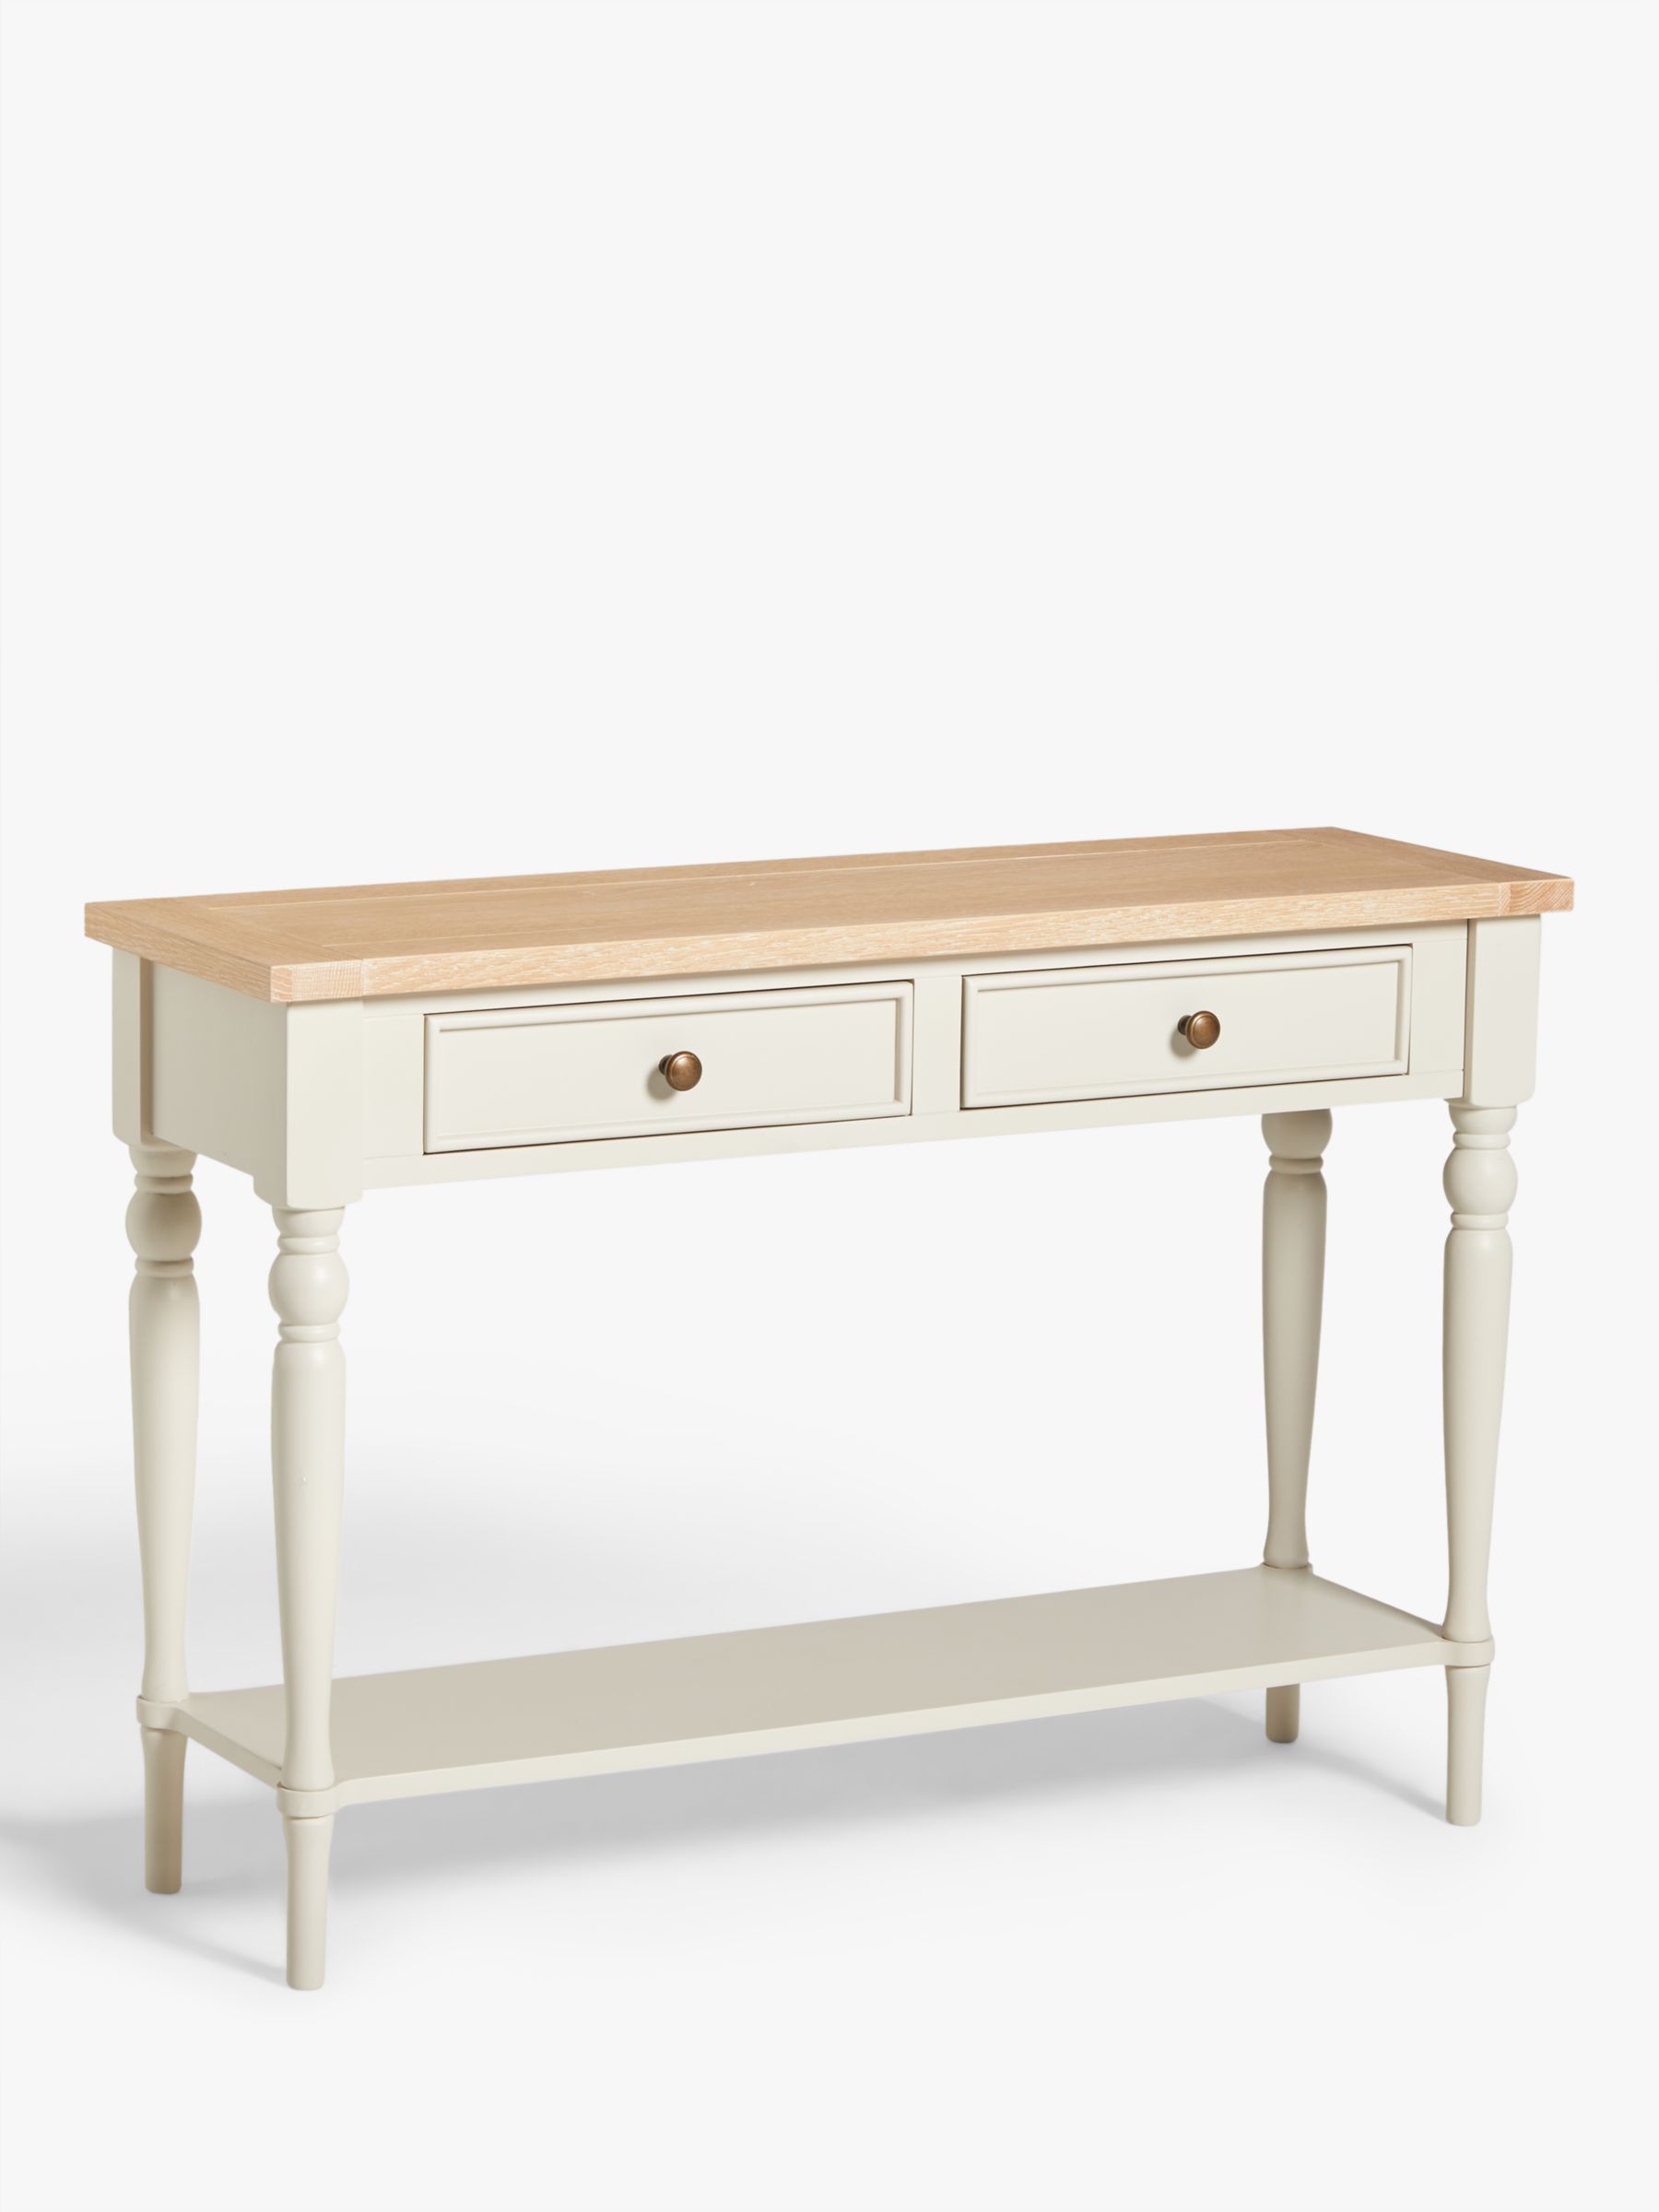 Photo of John lewis foxmoor console table fsc-certified -acacia wood- natural cream